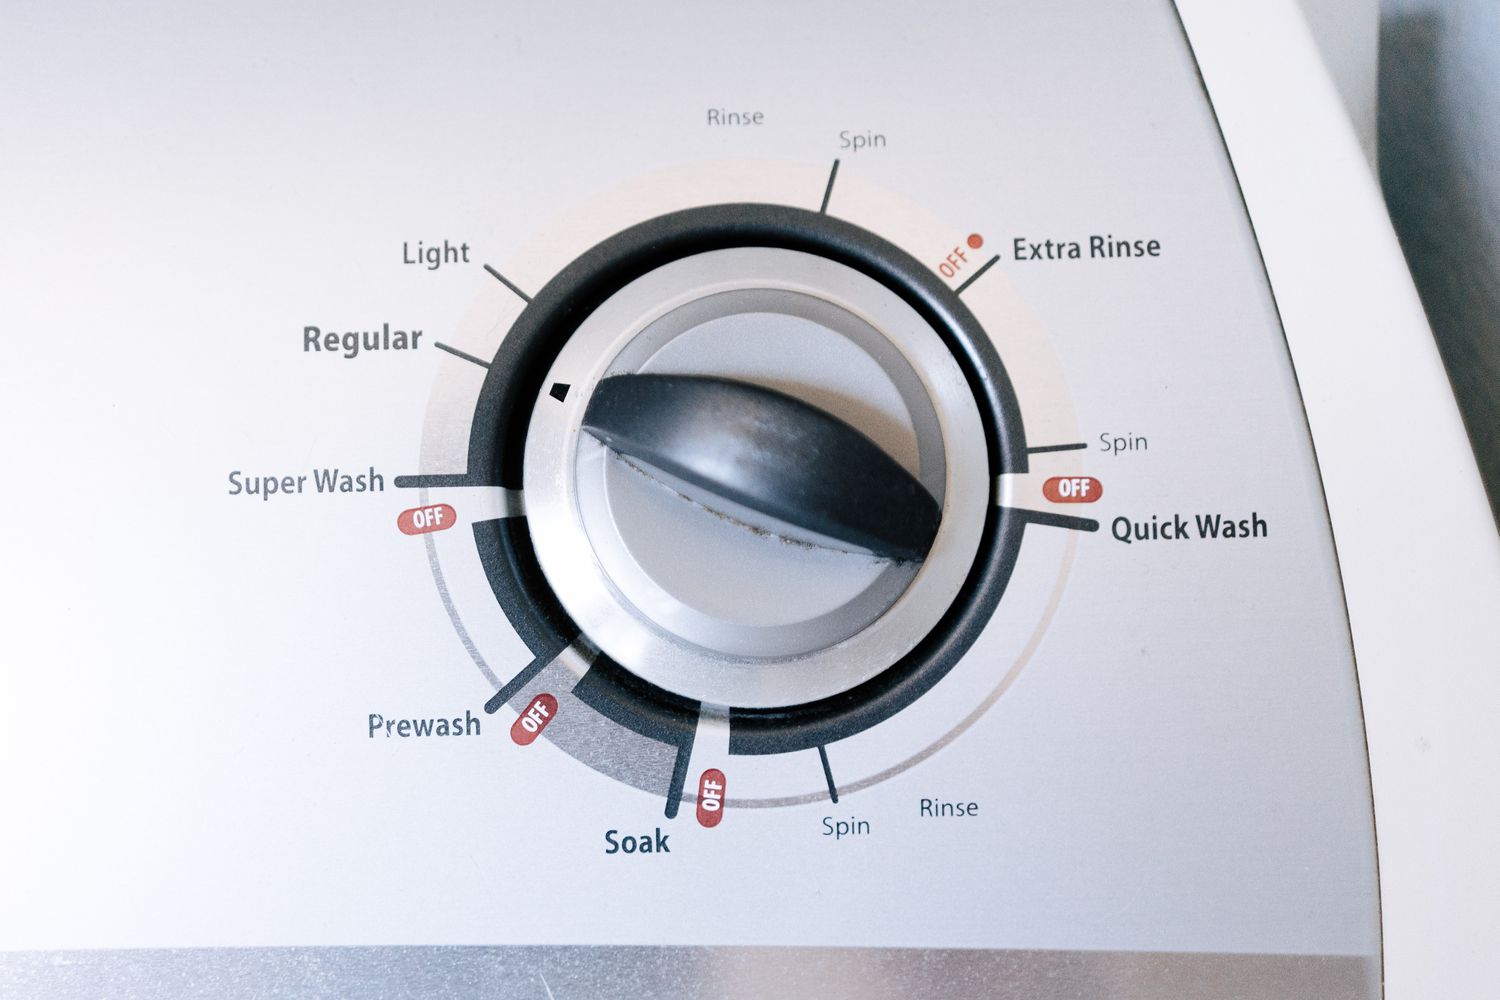 setting the wash cycle